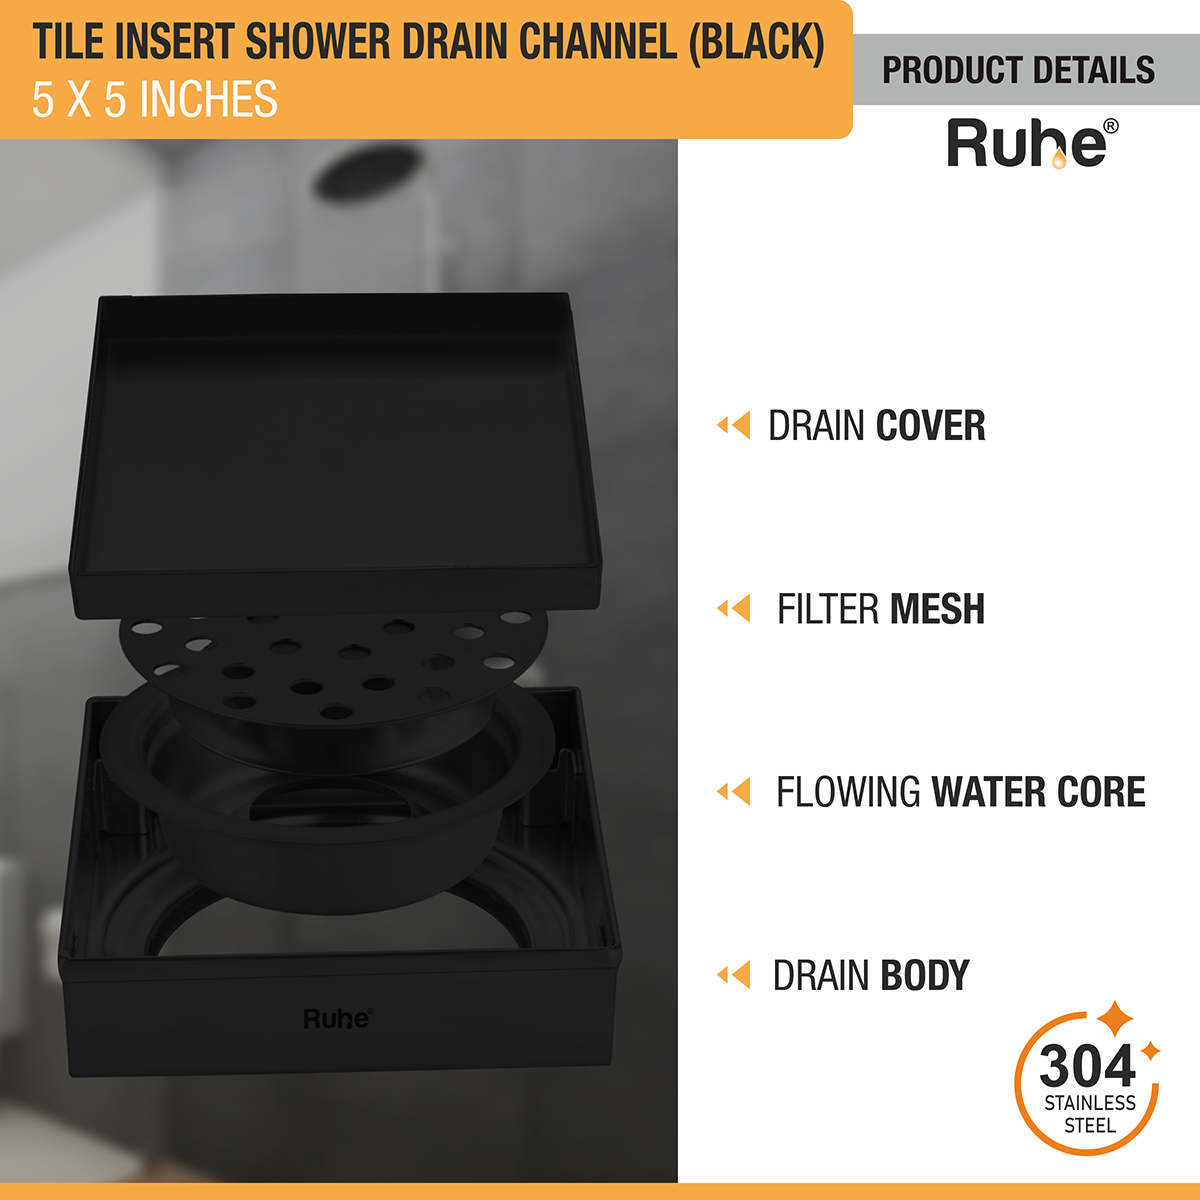 Tile Insert Shower Drain Channel (5 x 5 Inches) Black PVD Coated with drain cover, filter mesh, flowing water core, drain body